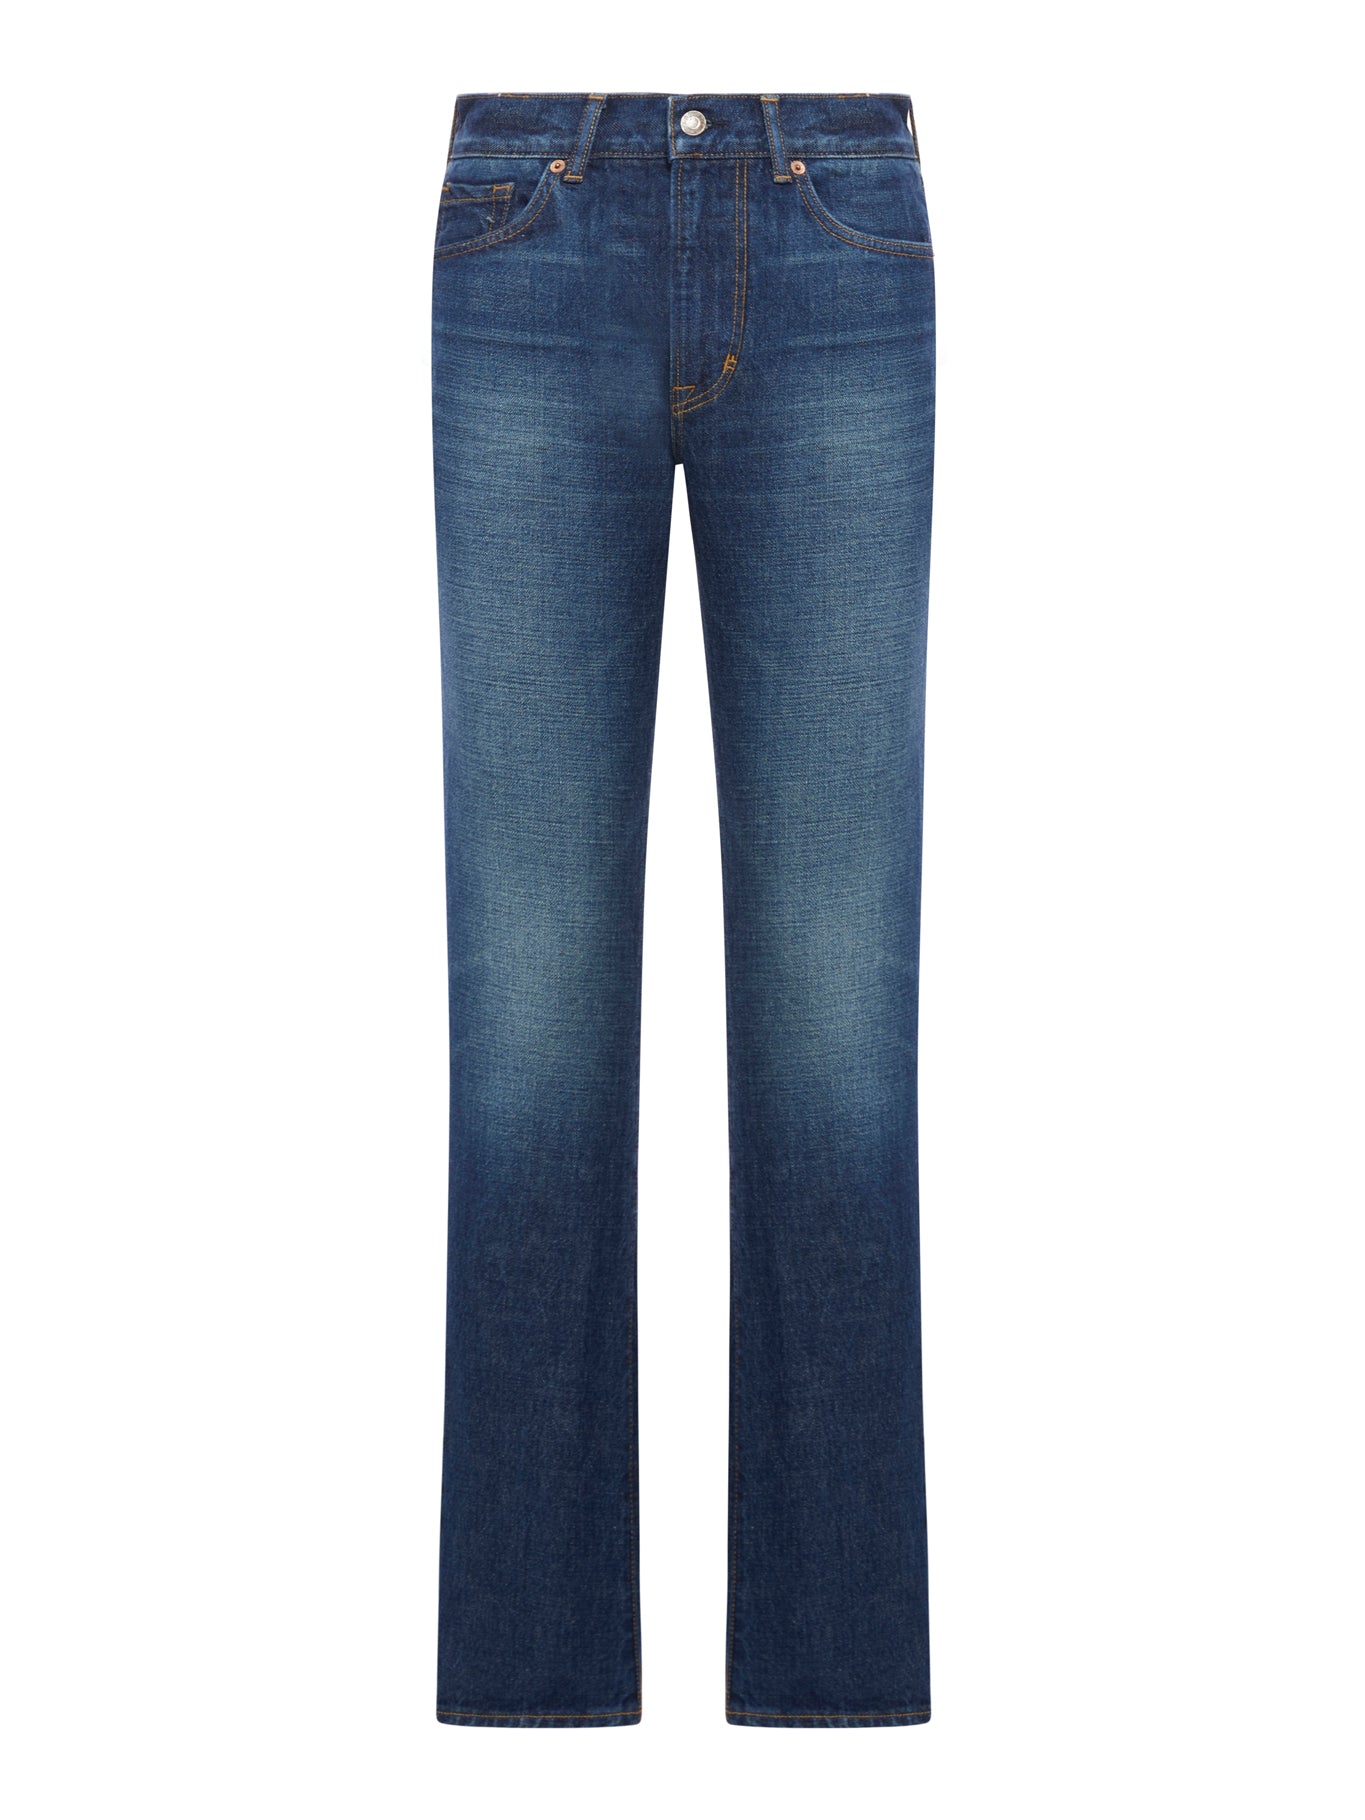 STONE WASHED DENIM STRAIGHT FIT JEANS